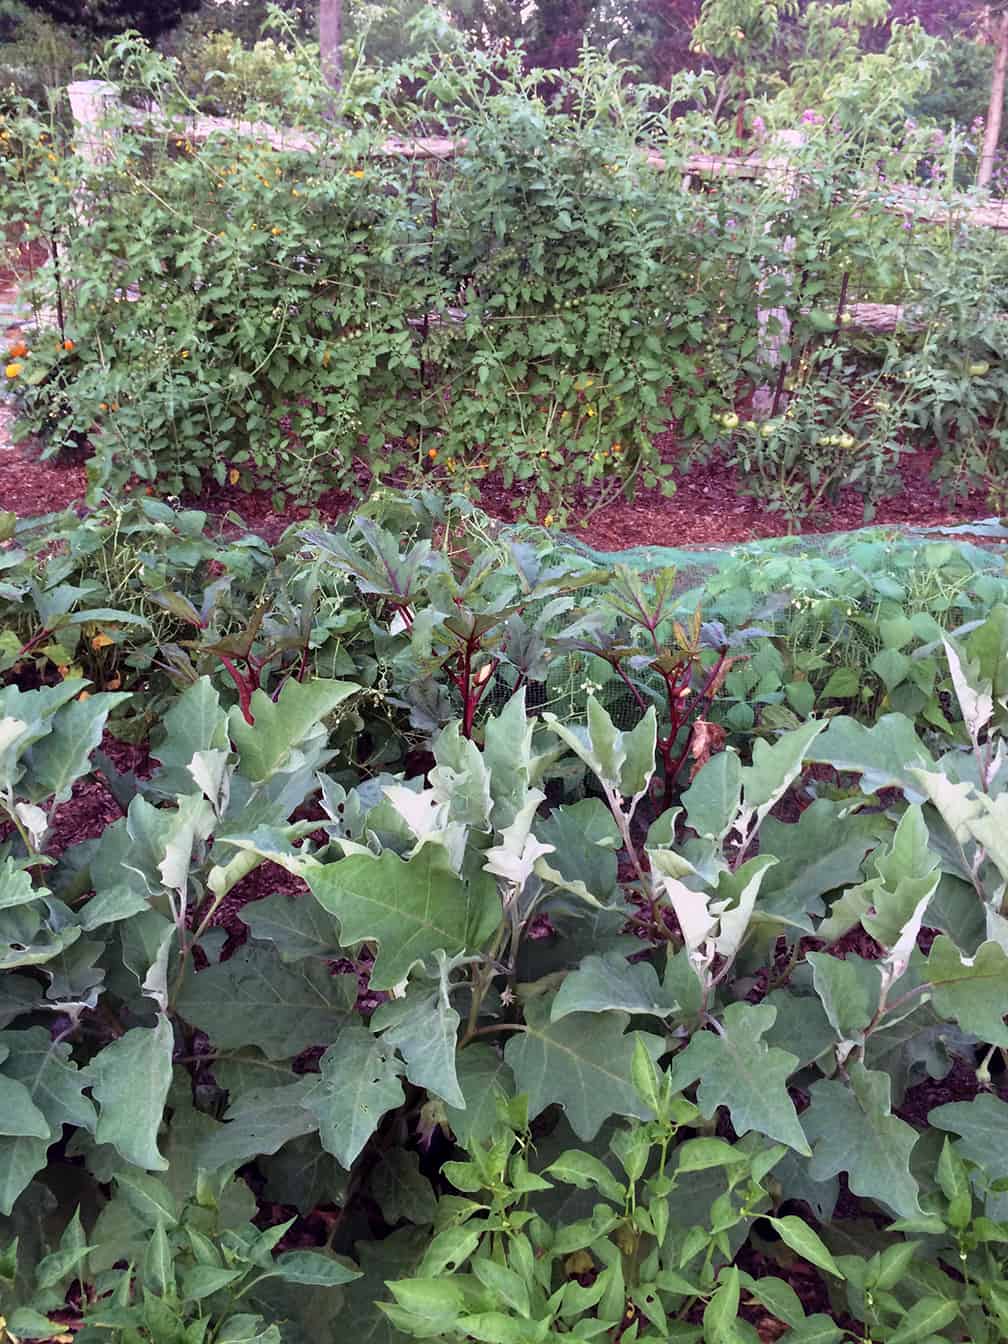 If you're growing vegetables, you need problem solvers!